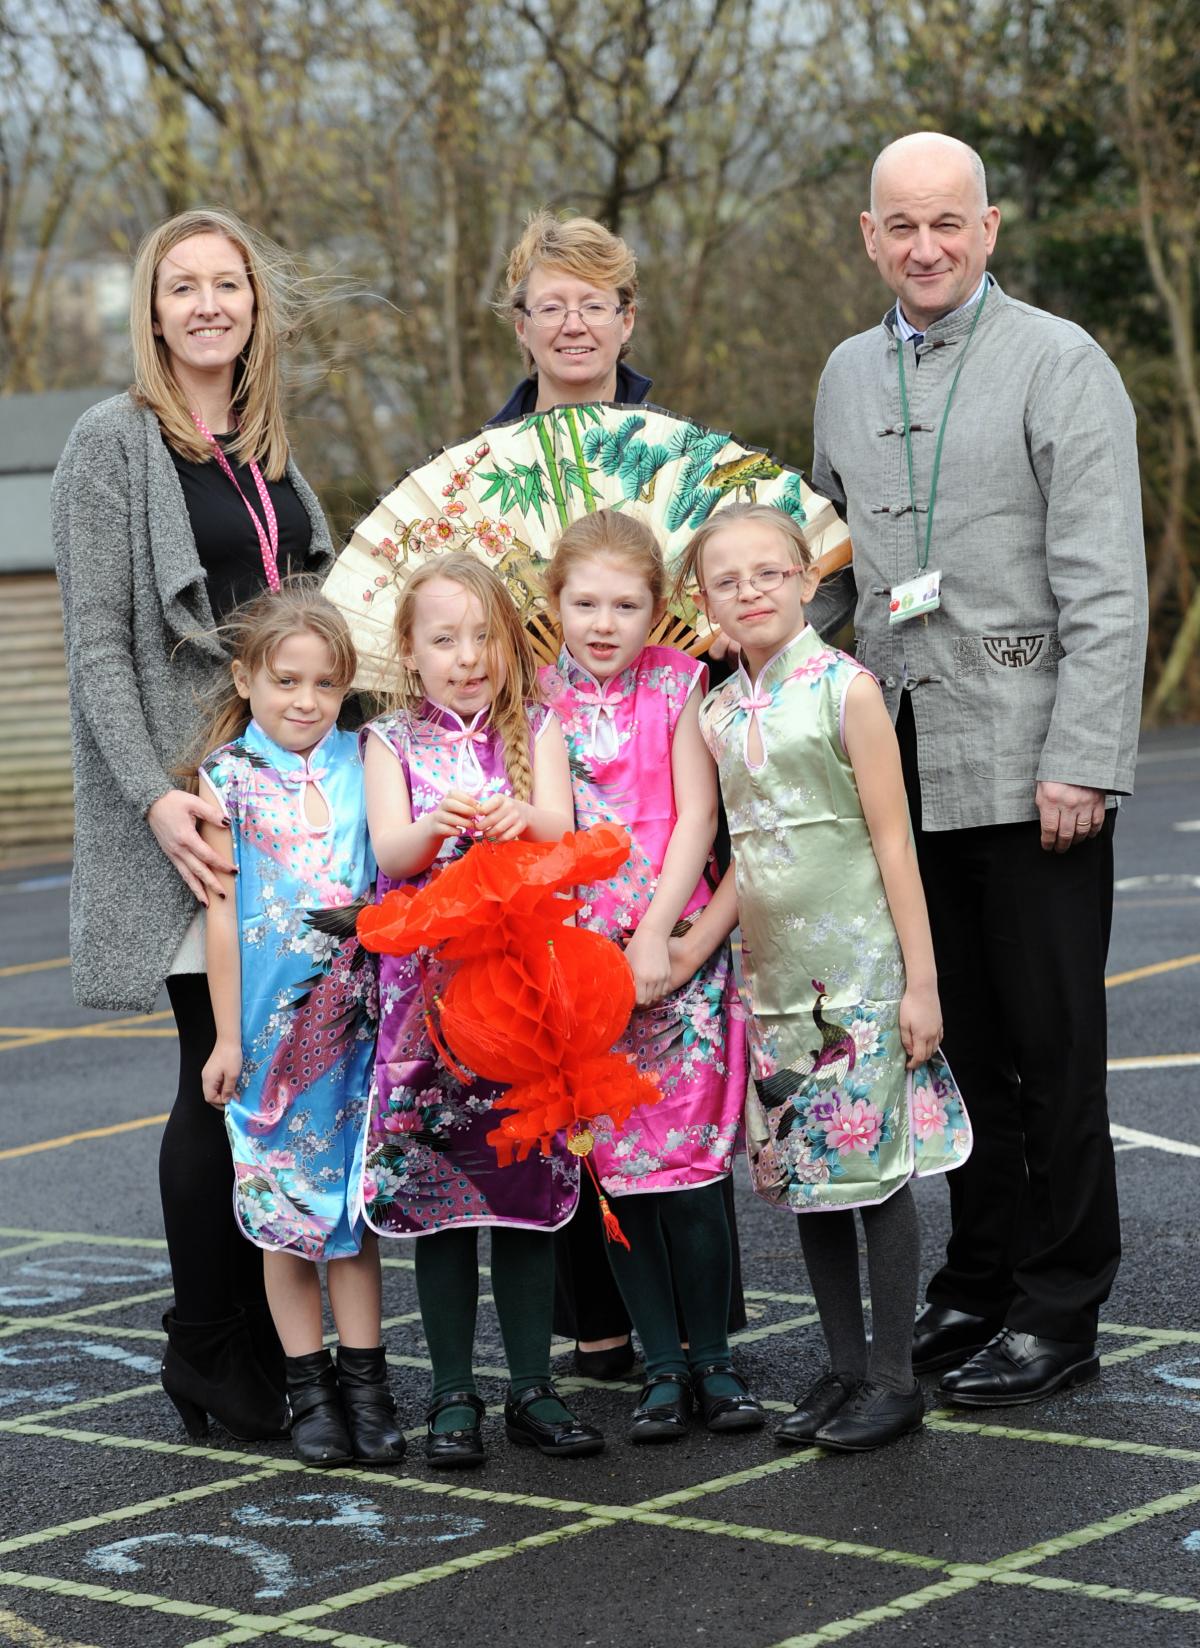 Children in Year 1 and 2 at Padiham Green Primary school take part in Chinese activities in the run up to Chinese New Year and also because the school is linked to a school in Quingdao in China.
Back L-R are year 2 teacher Claire Edwards, Chair of Governo